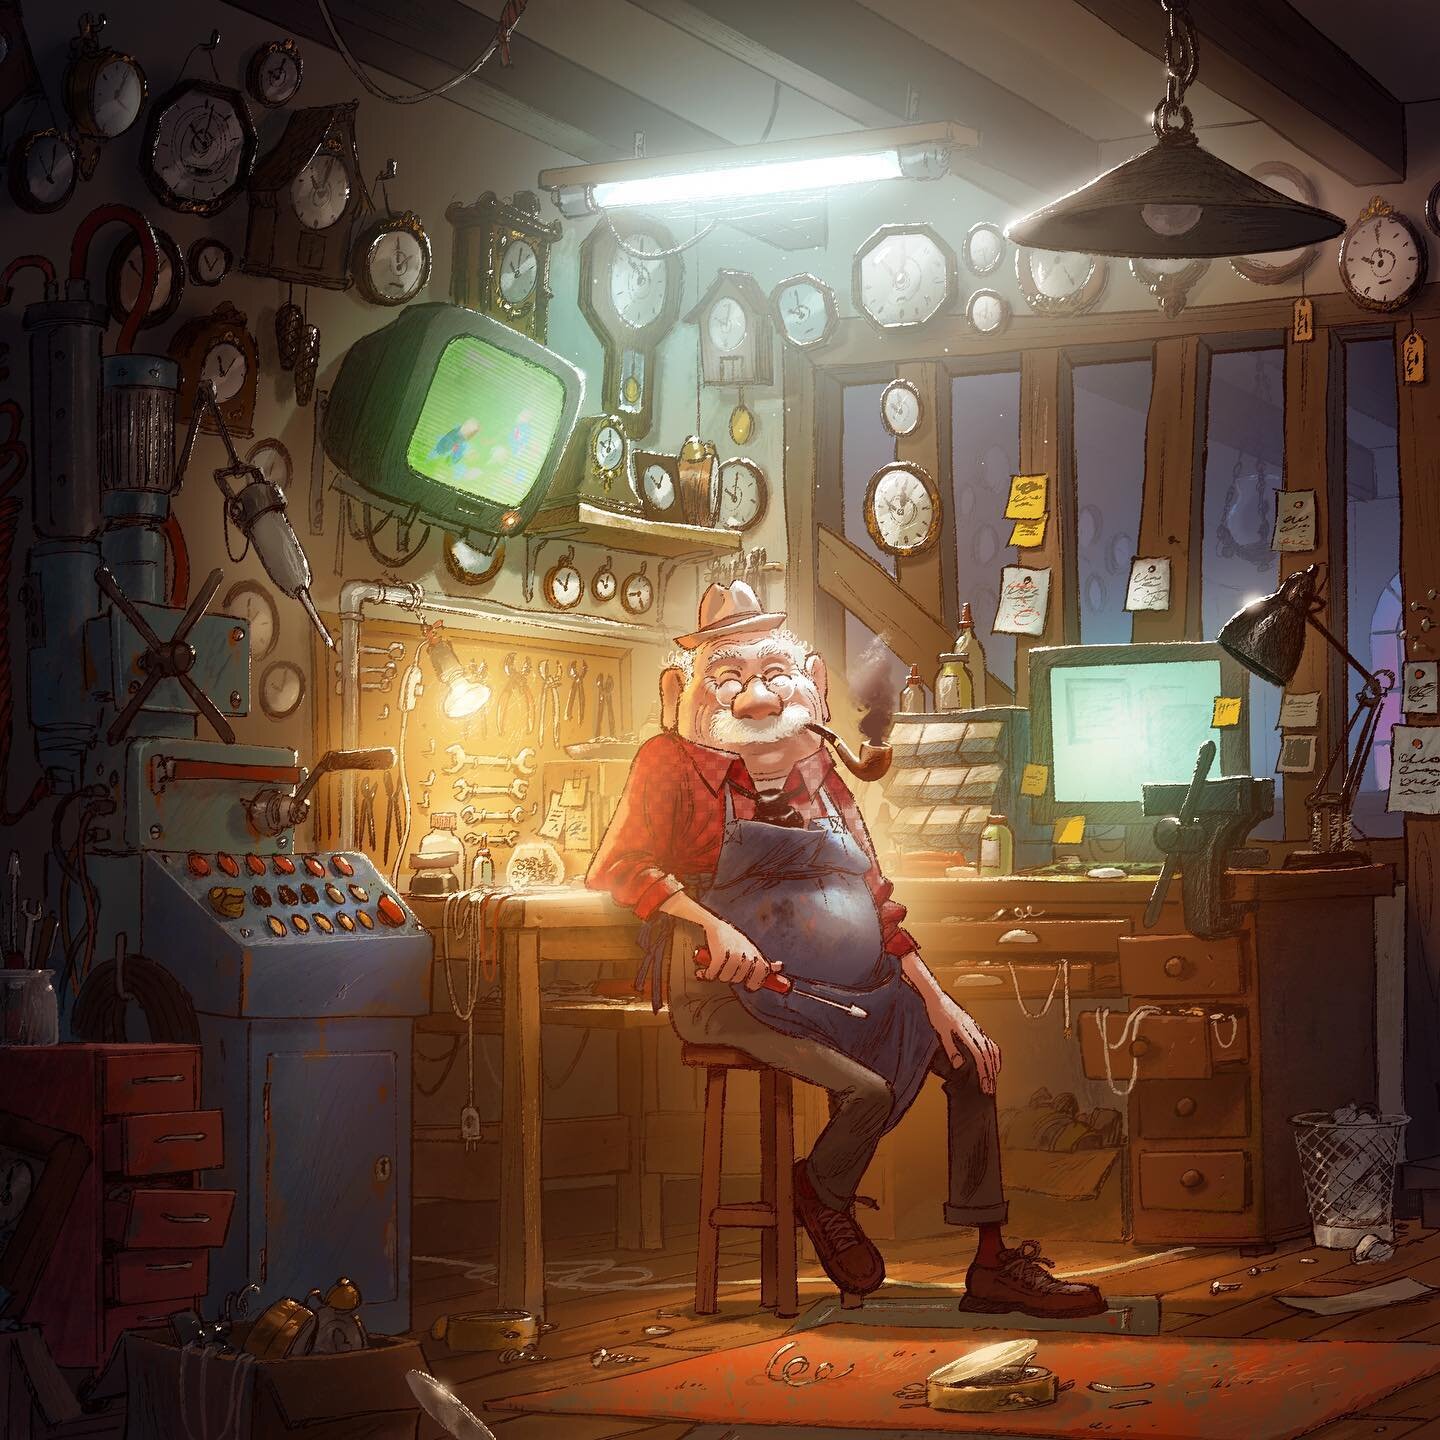 The clockmaker workshop from my schoolism course called &laquo;&nbsp;Visual development - step by step&nbsp;&raquo;, where I share my creative process when doing this piece. 
You can also apply for live sessions where I&rsquo;ll give you feedback on 